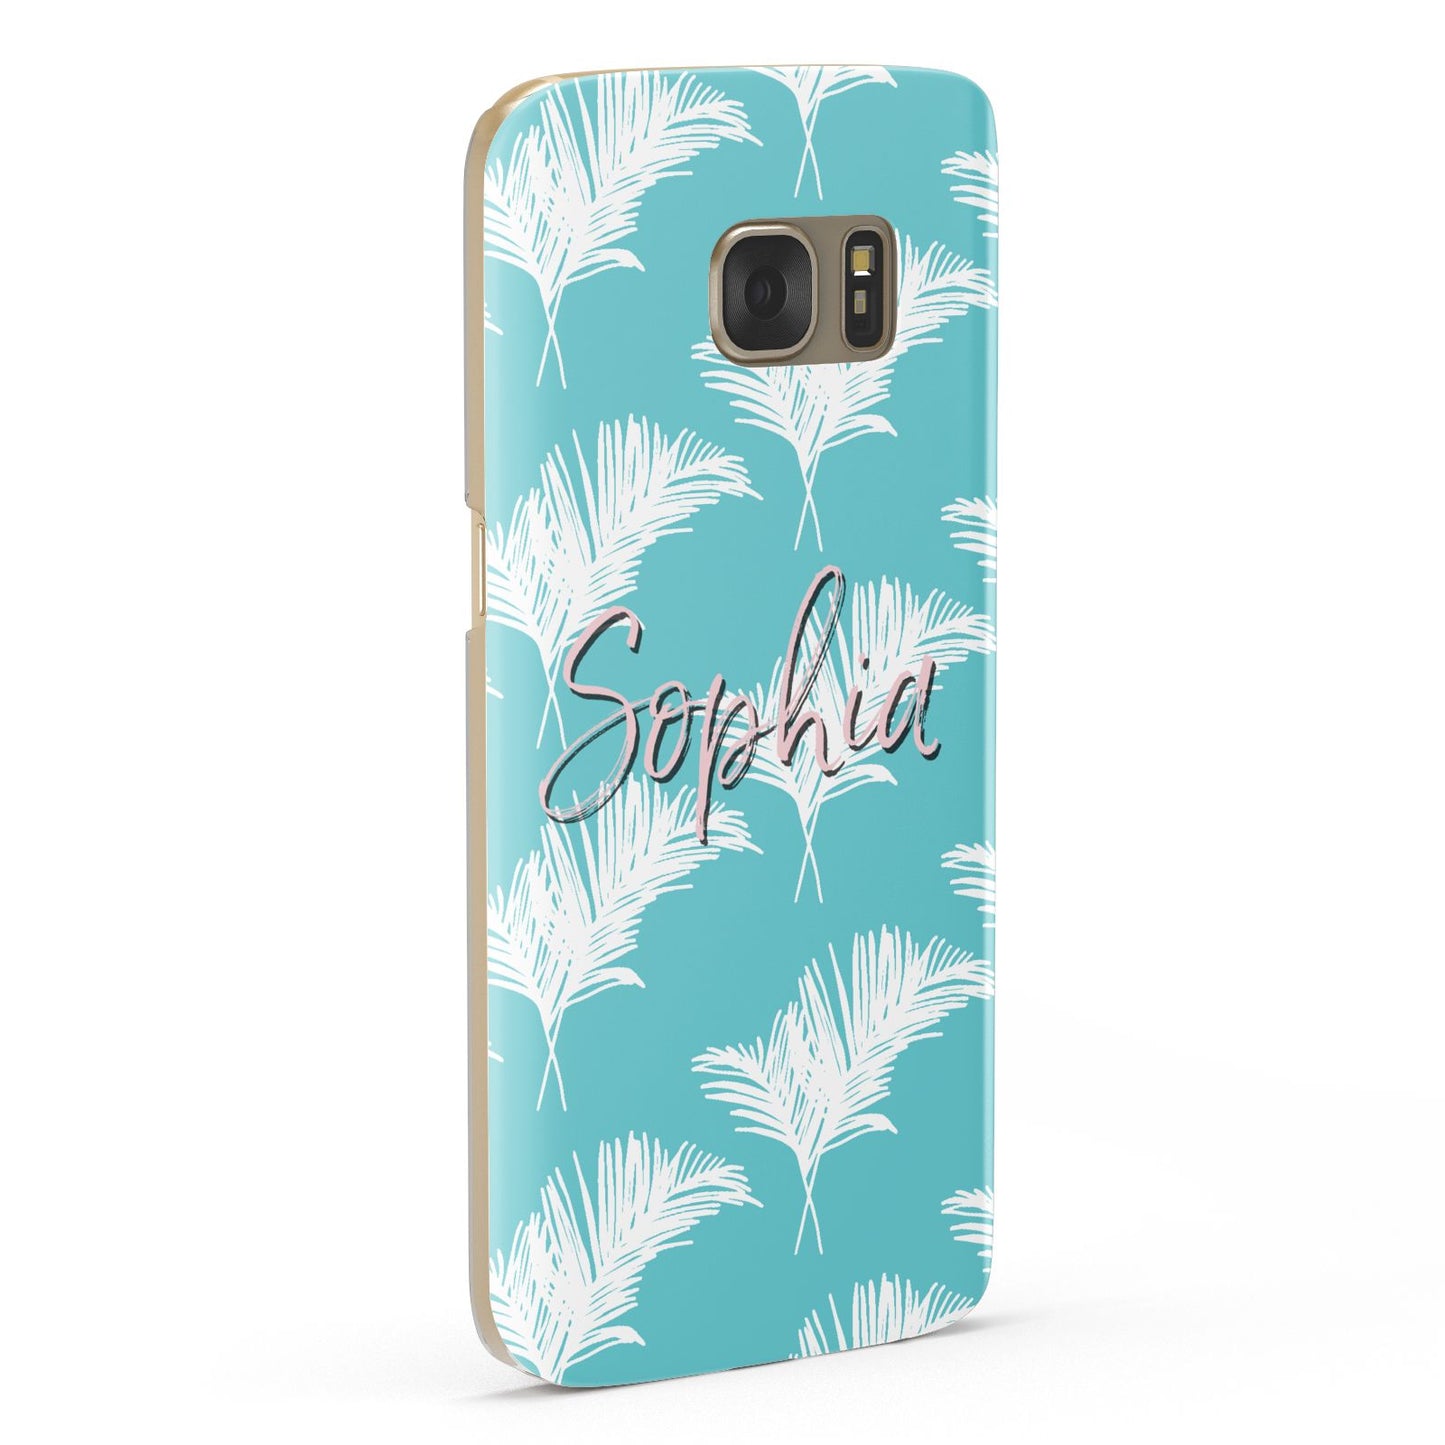 Personalised Blue White Tropical Foliage Samsung Galaxy Case Fourty Five Degrees